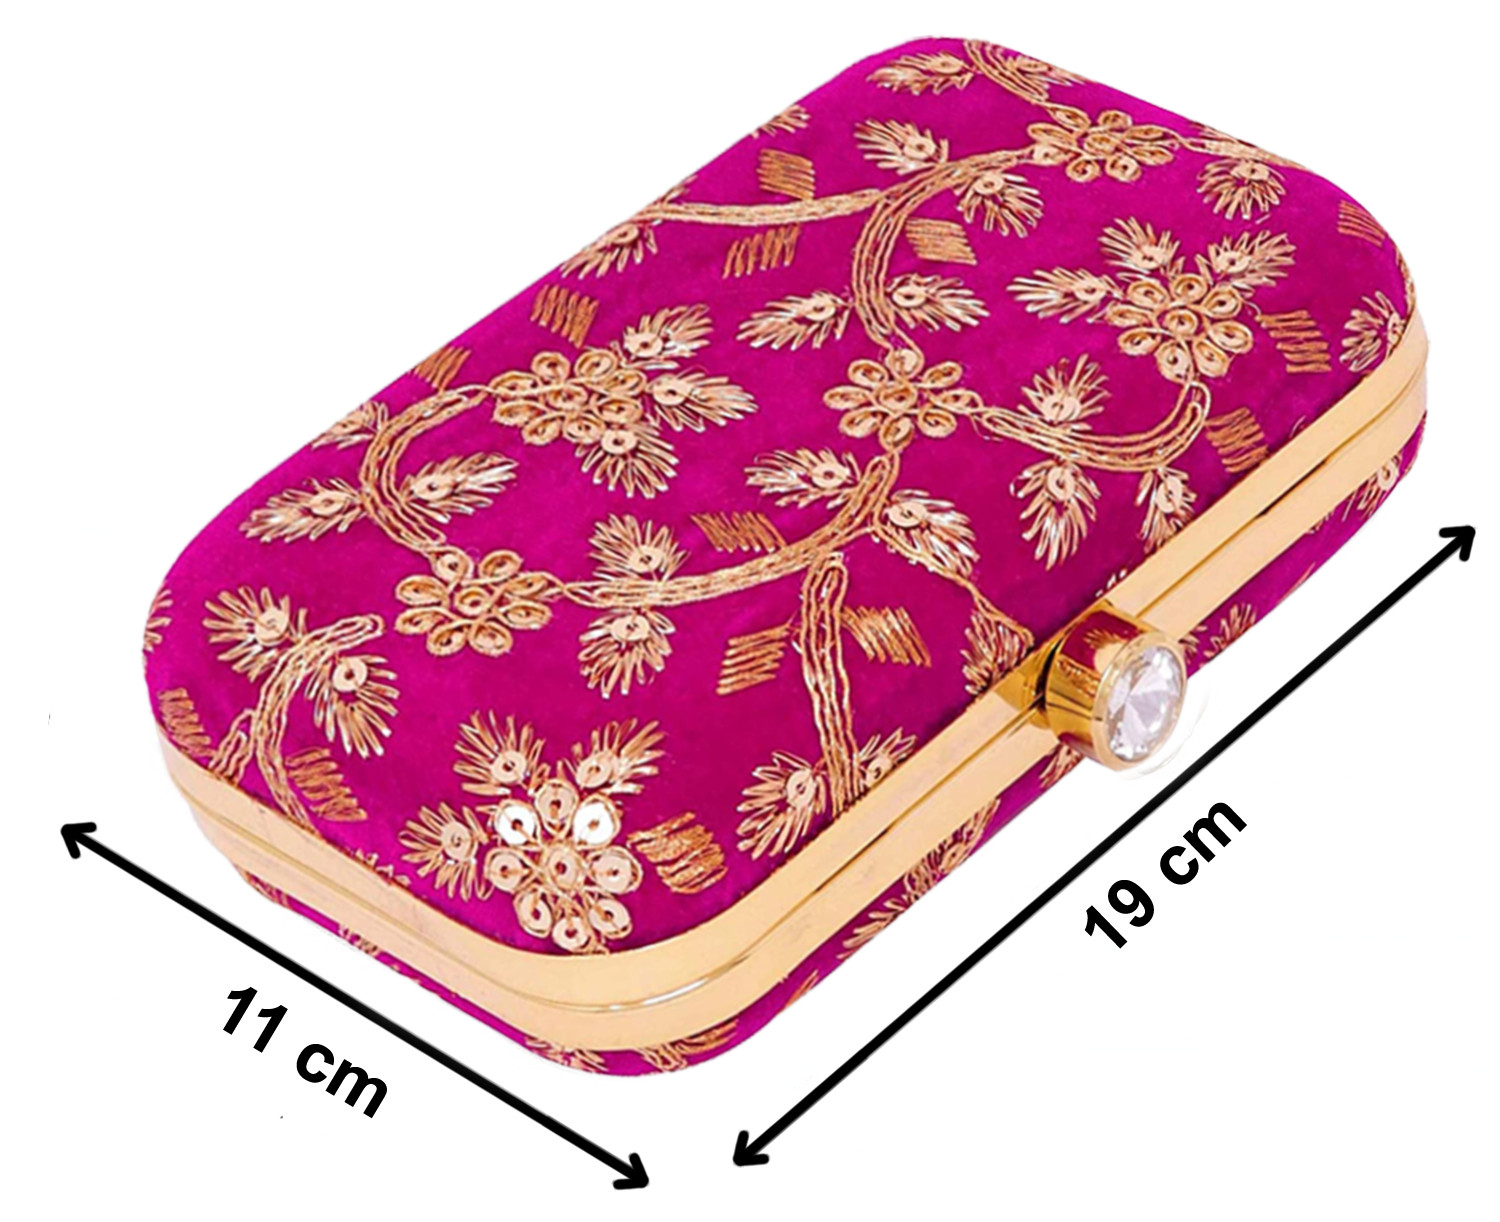 Kuber Industries Party Wear Clutch Bag Purse Handbag For Bridal, Casual, Party, Wedding,Set Of 2 (Pink & Cream)-KUBMRT11878